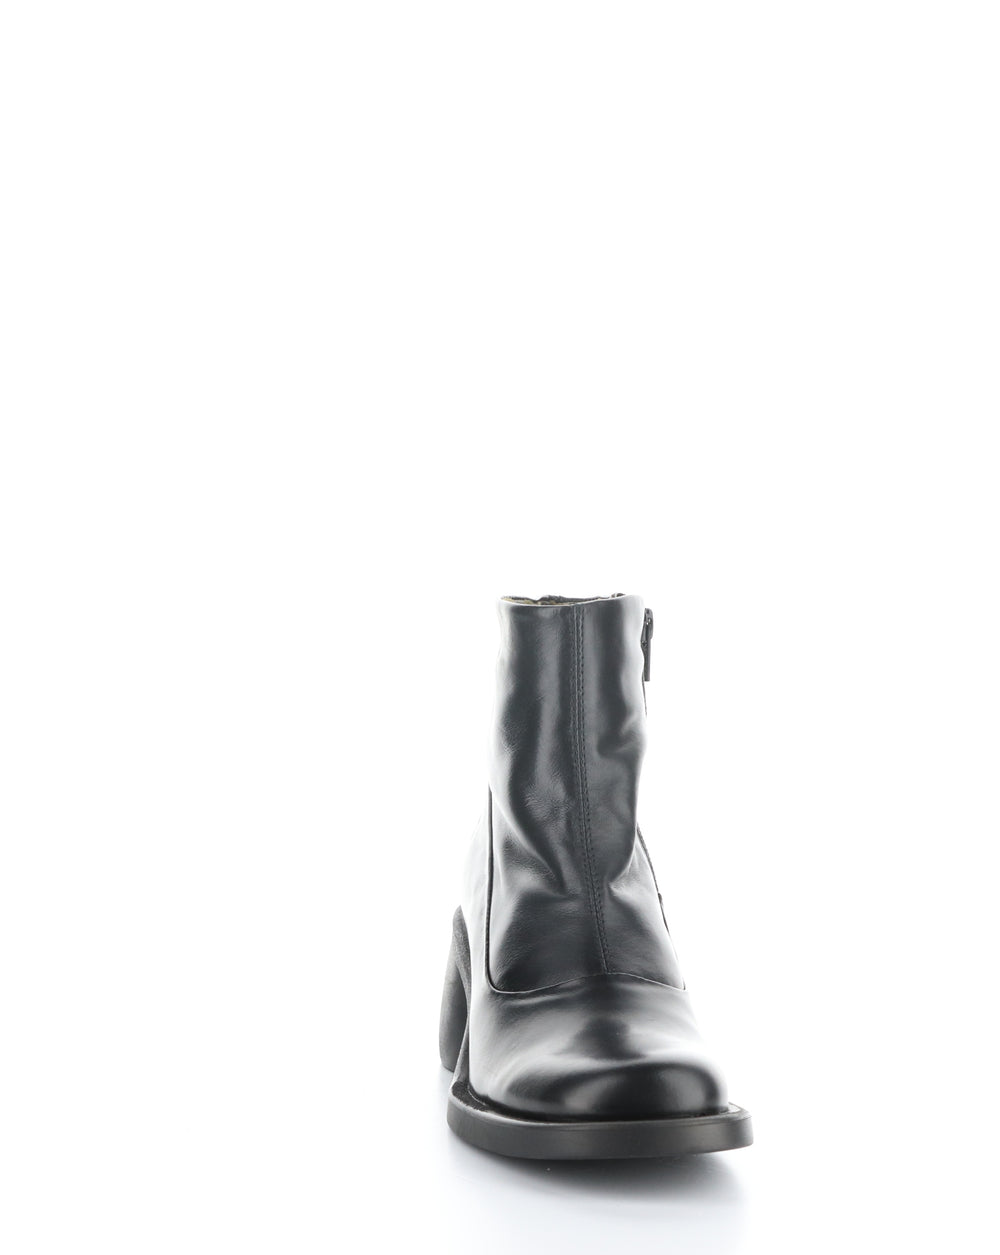 HINT003FLY 000 BLACK Round Toe Boots